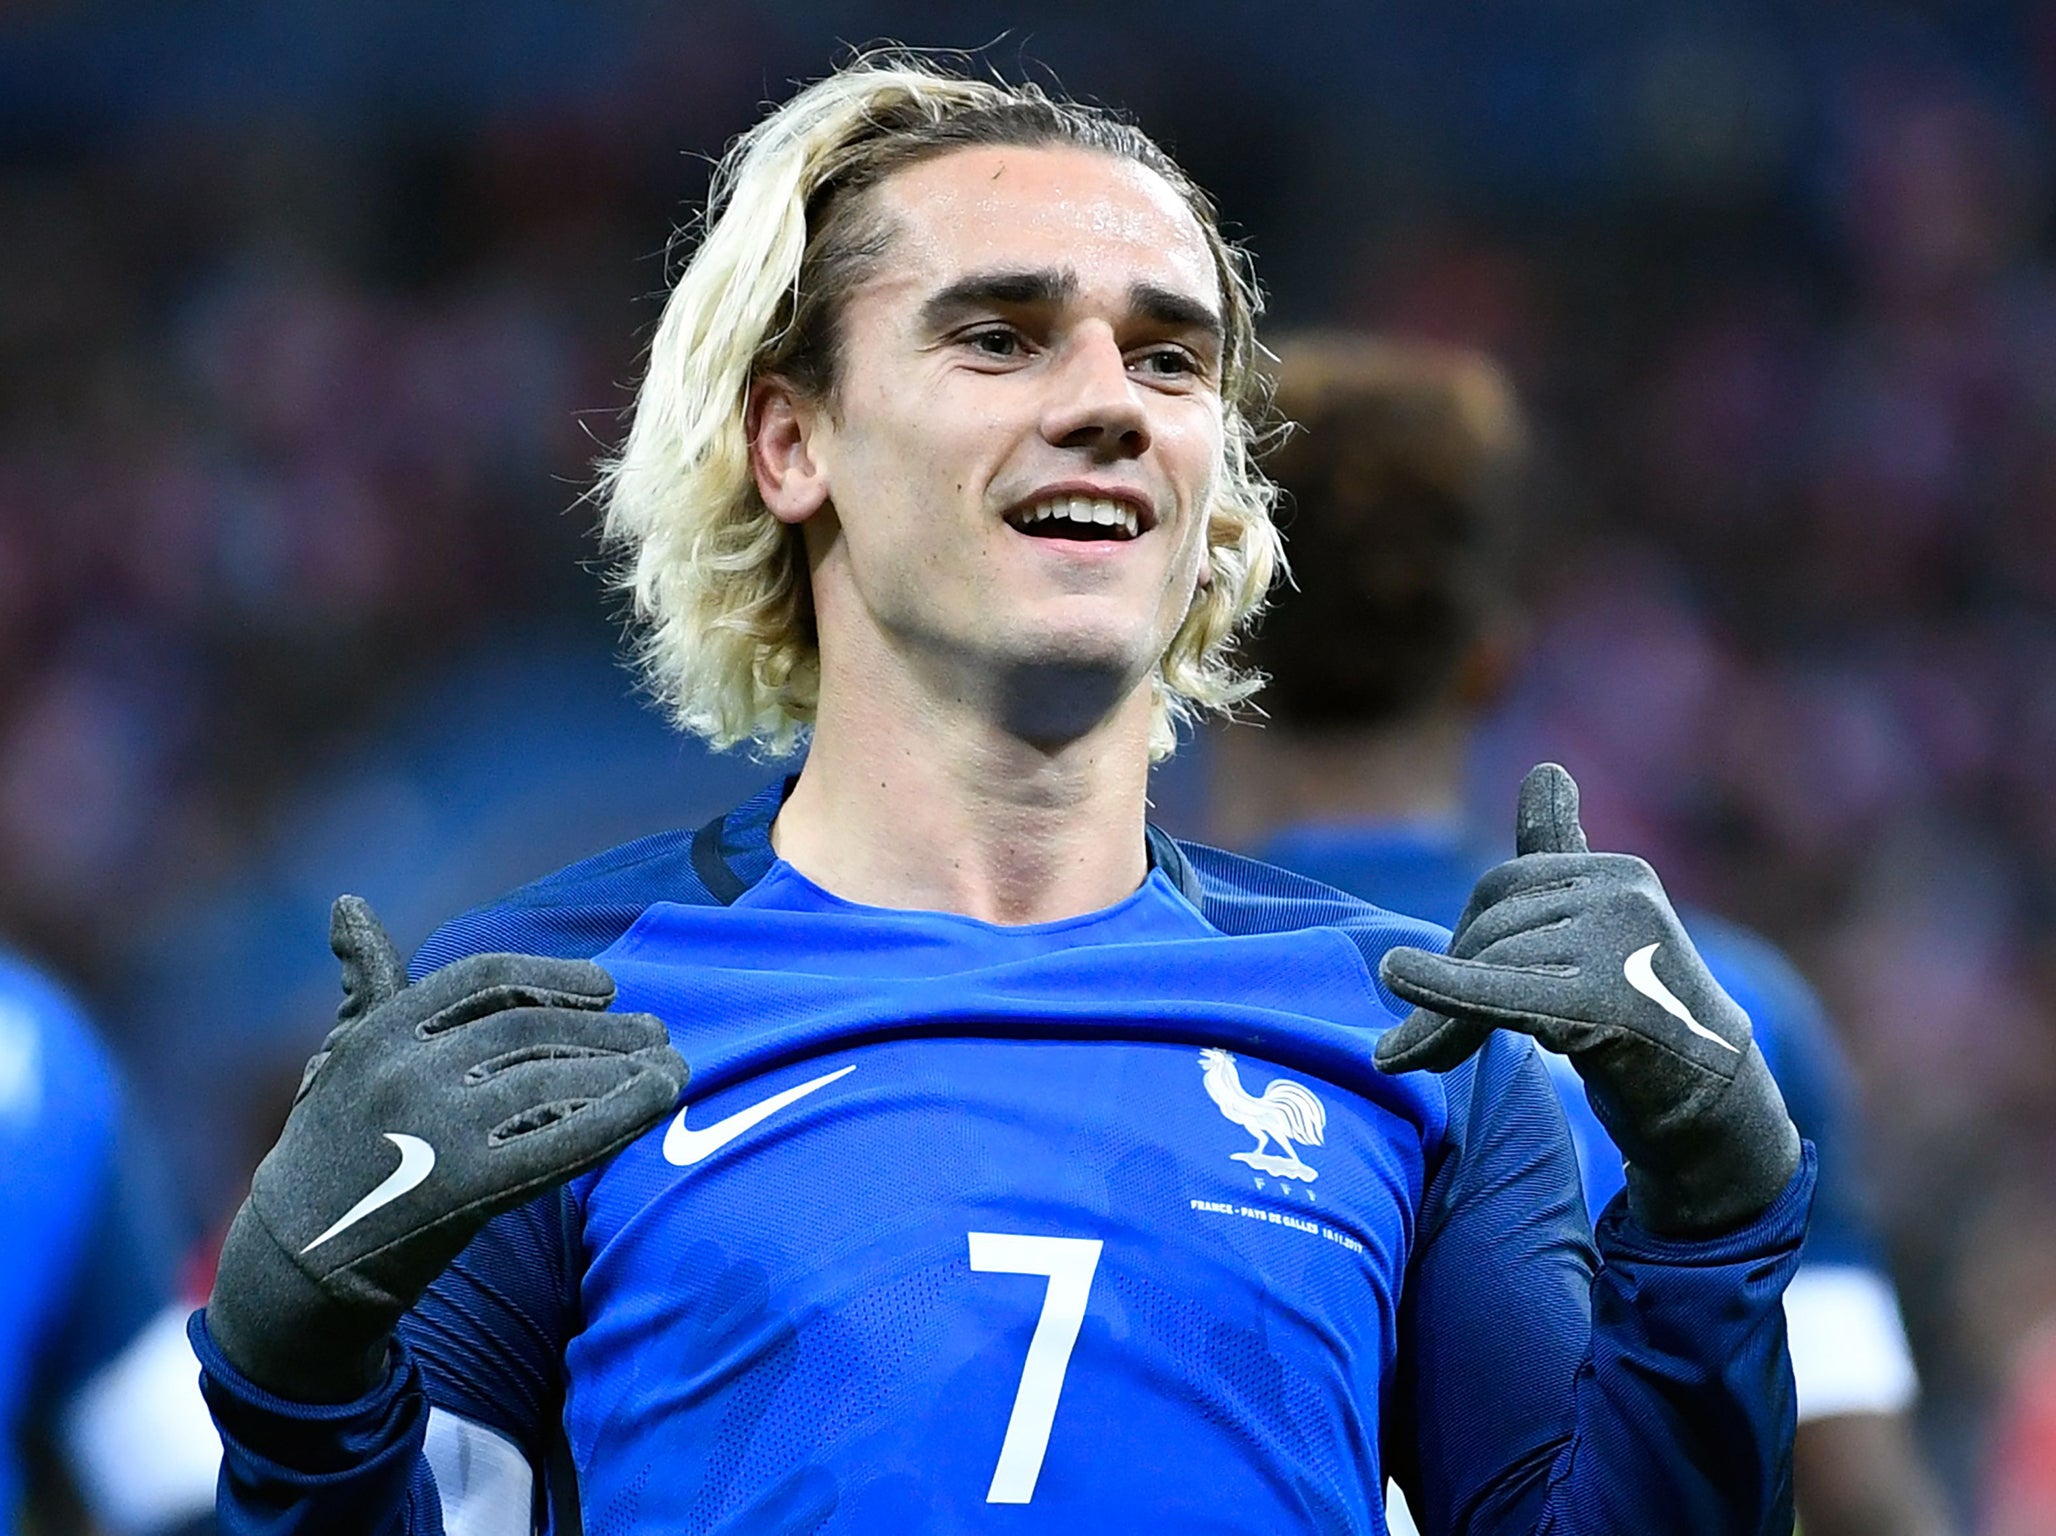 Griezmann was one of the standout performers